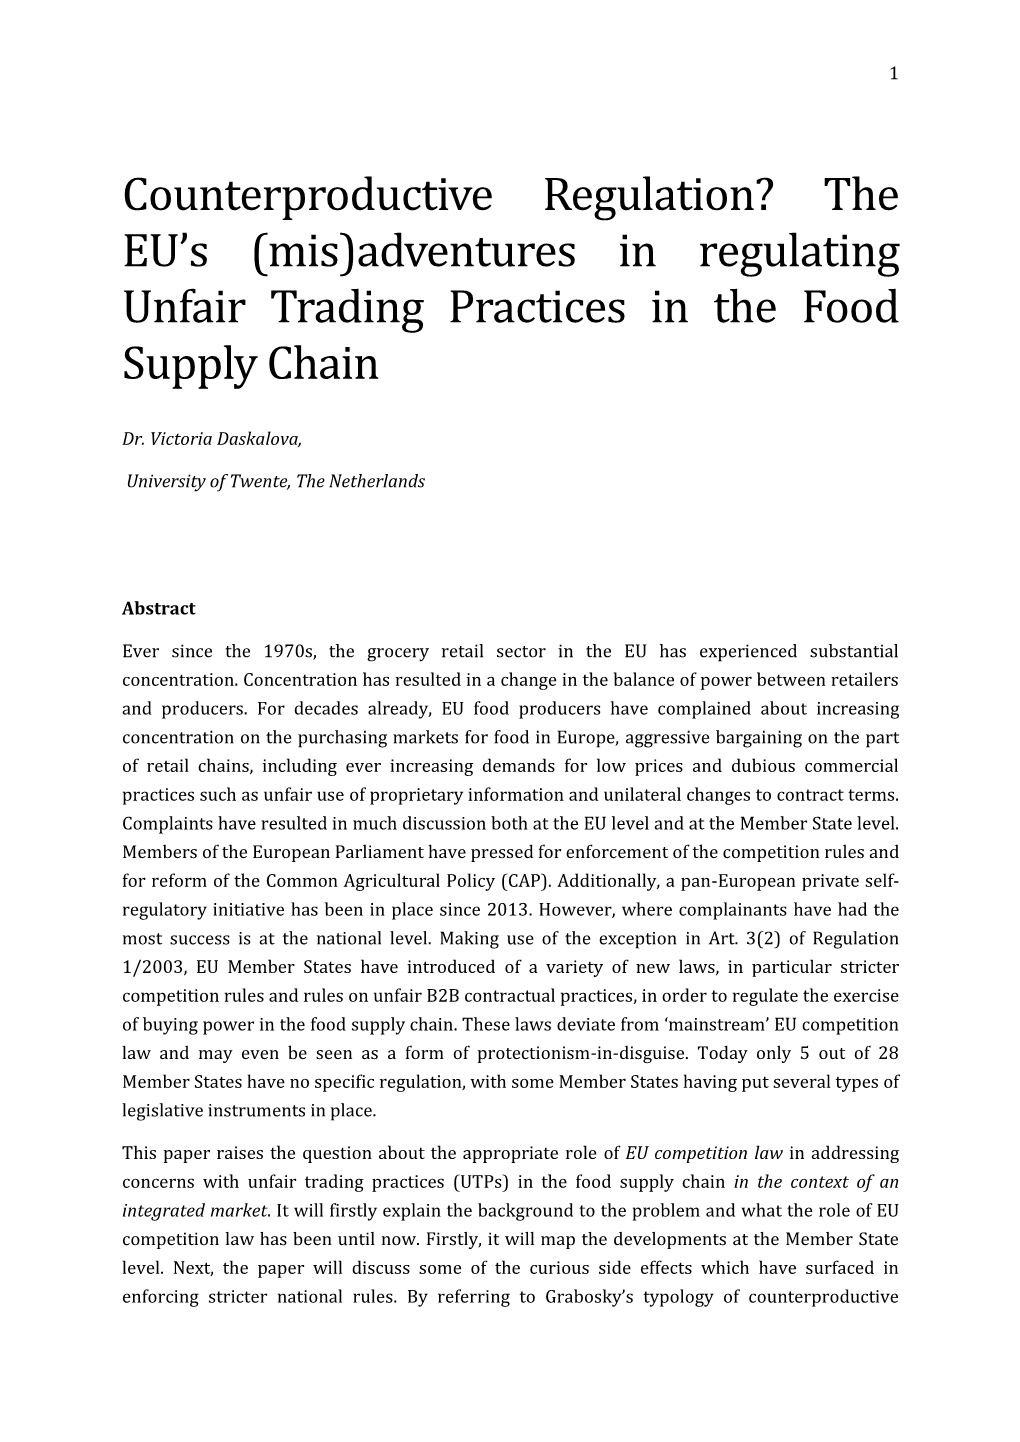 (Mis)Adventures in Regulating Unfair Trading Practices in the Food Supply Chain